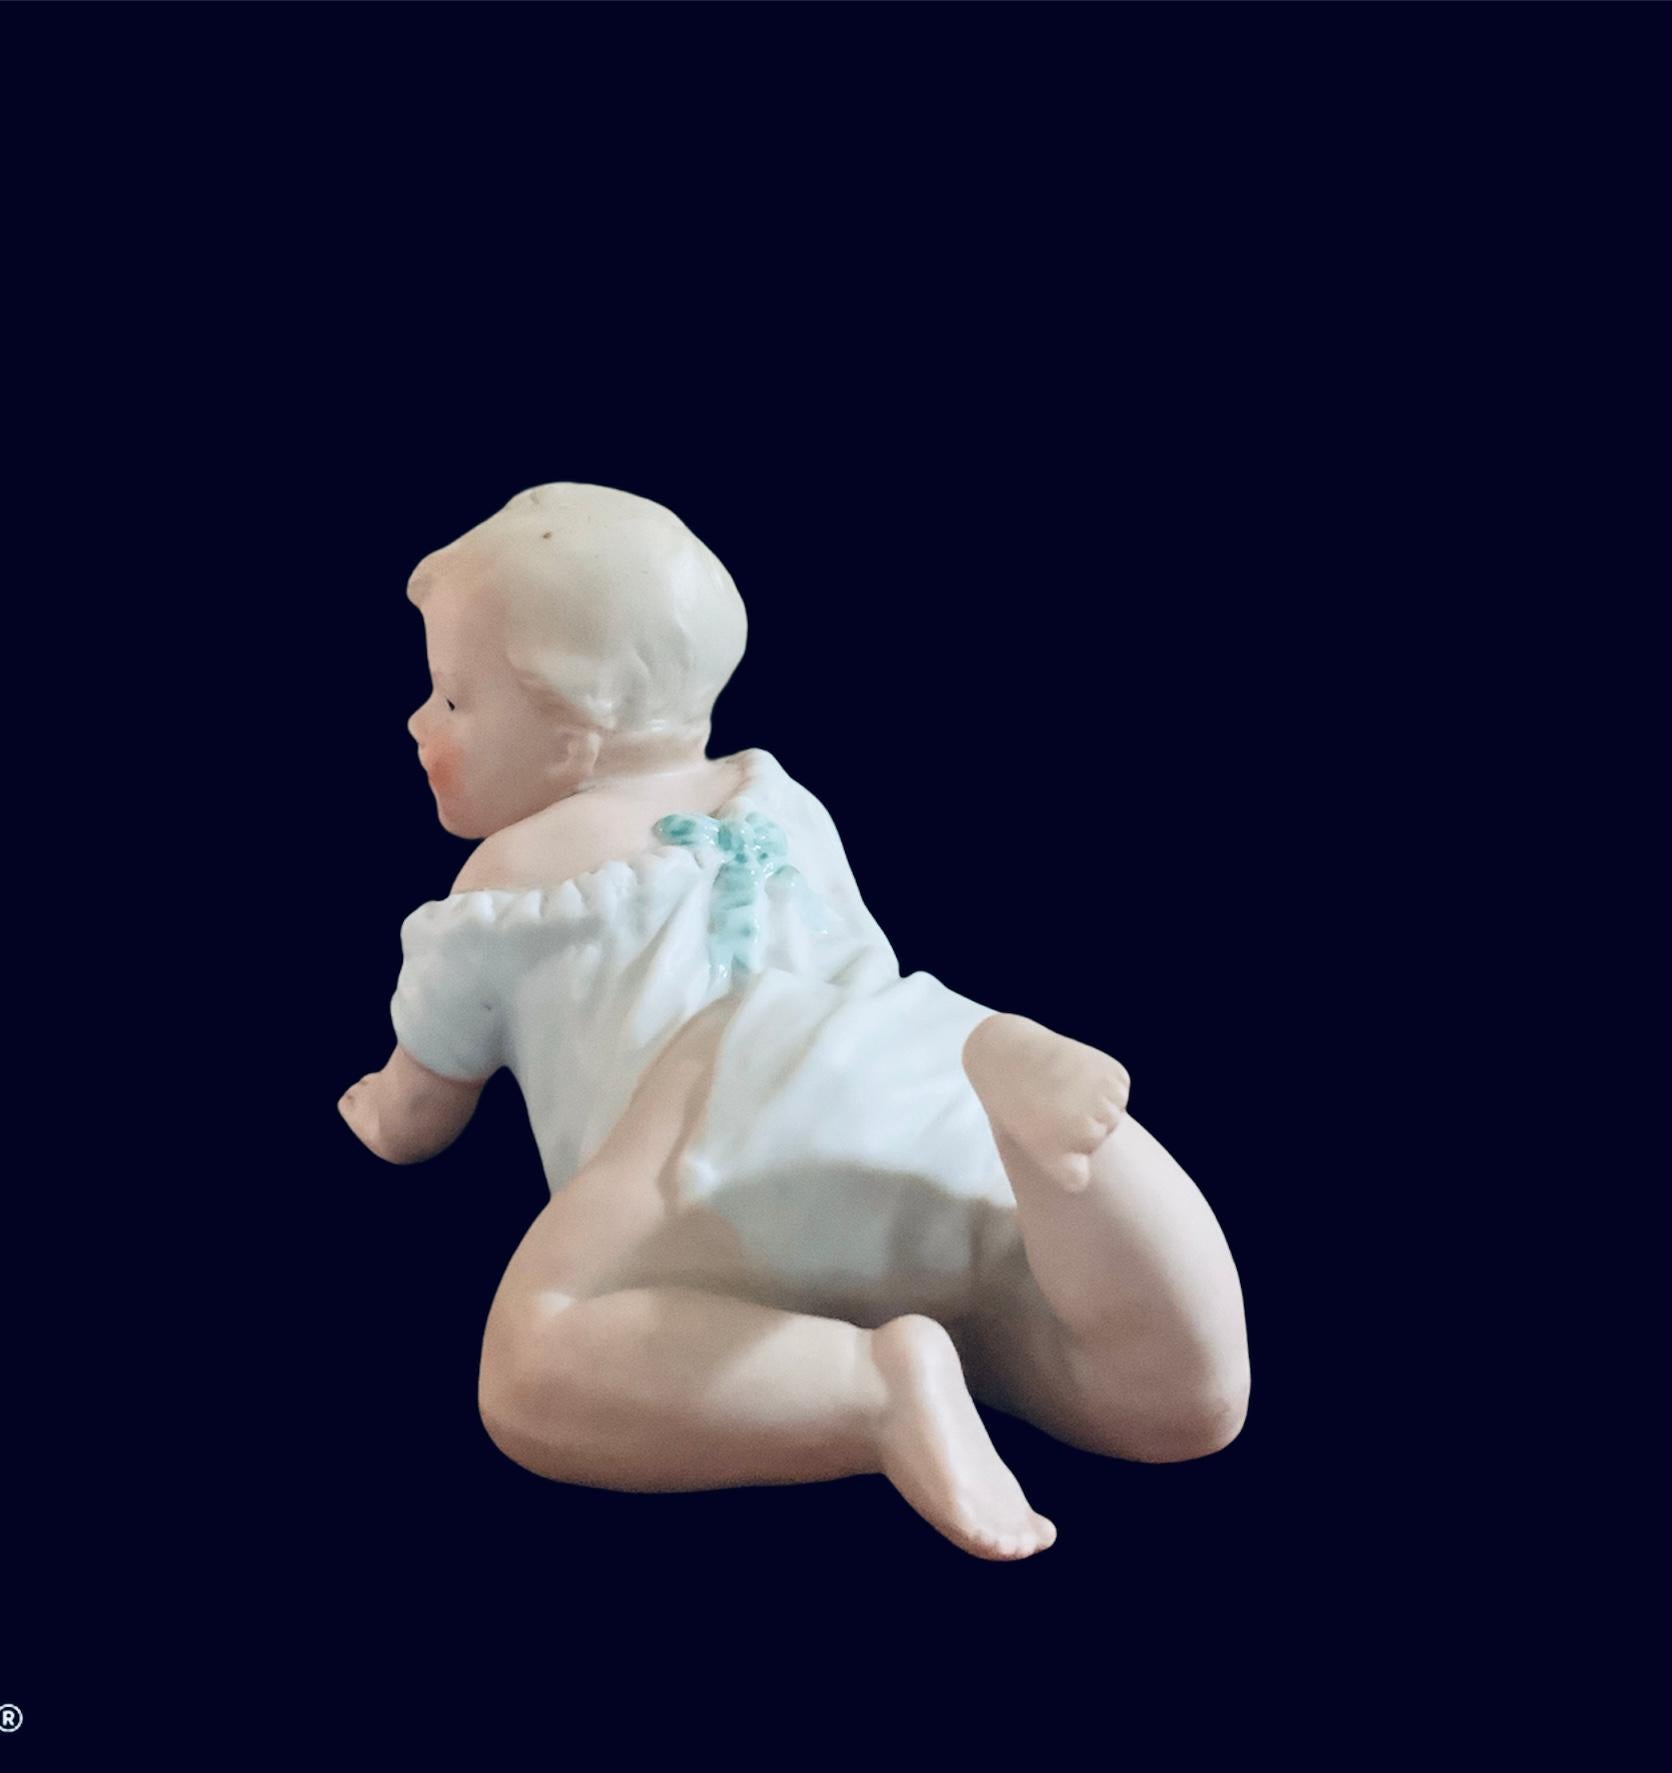 This is a bisque porcelain piano baby boy figurine. He is crawling and looking kind of surprised to the side with a shy smile. He is wearing a delicate long white chemise with ruffles, large blue bow and ribbons in the back. His hair is curly